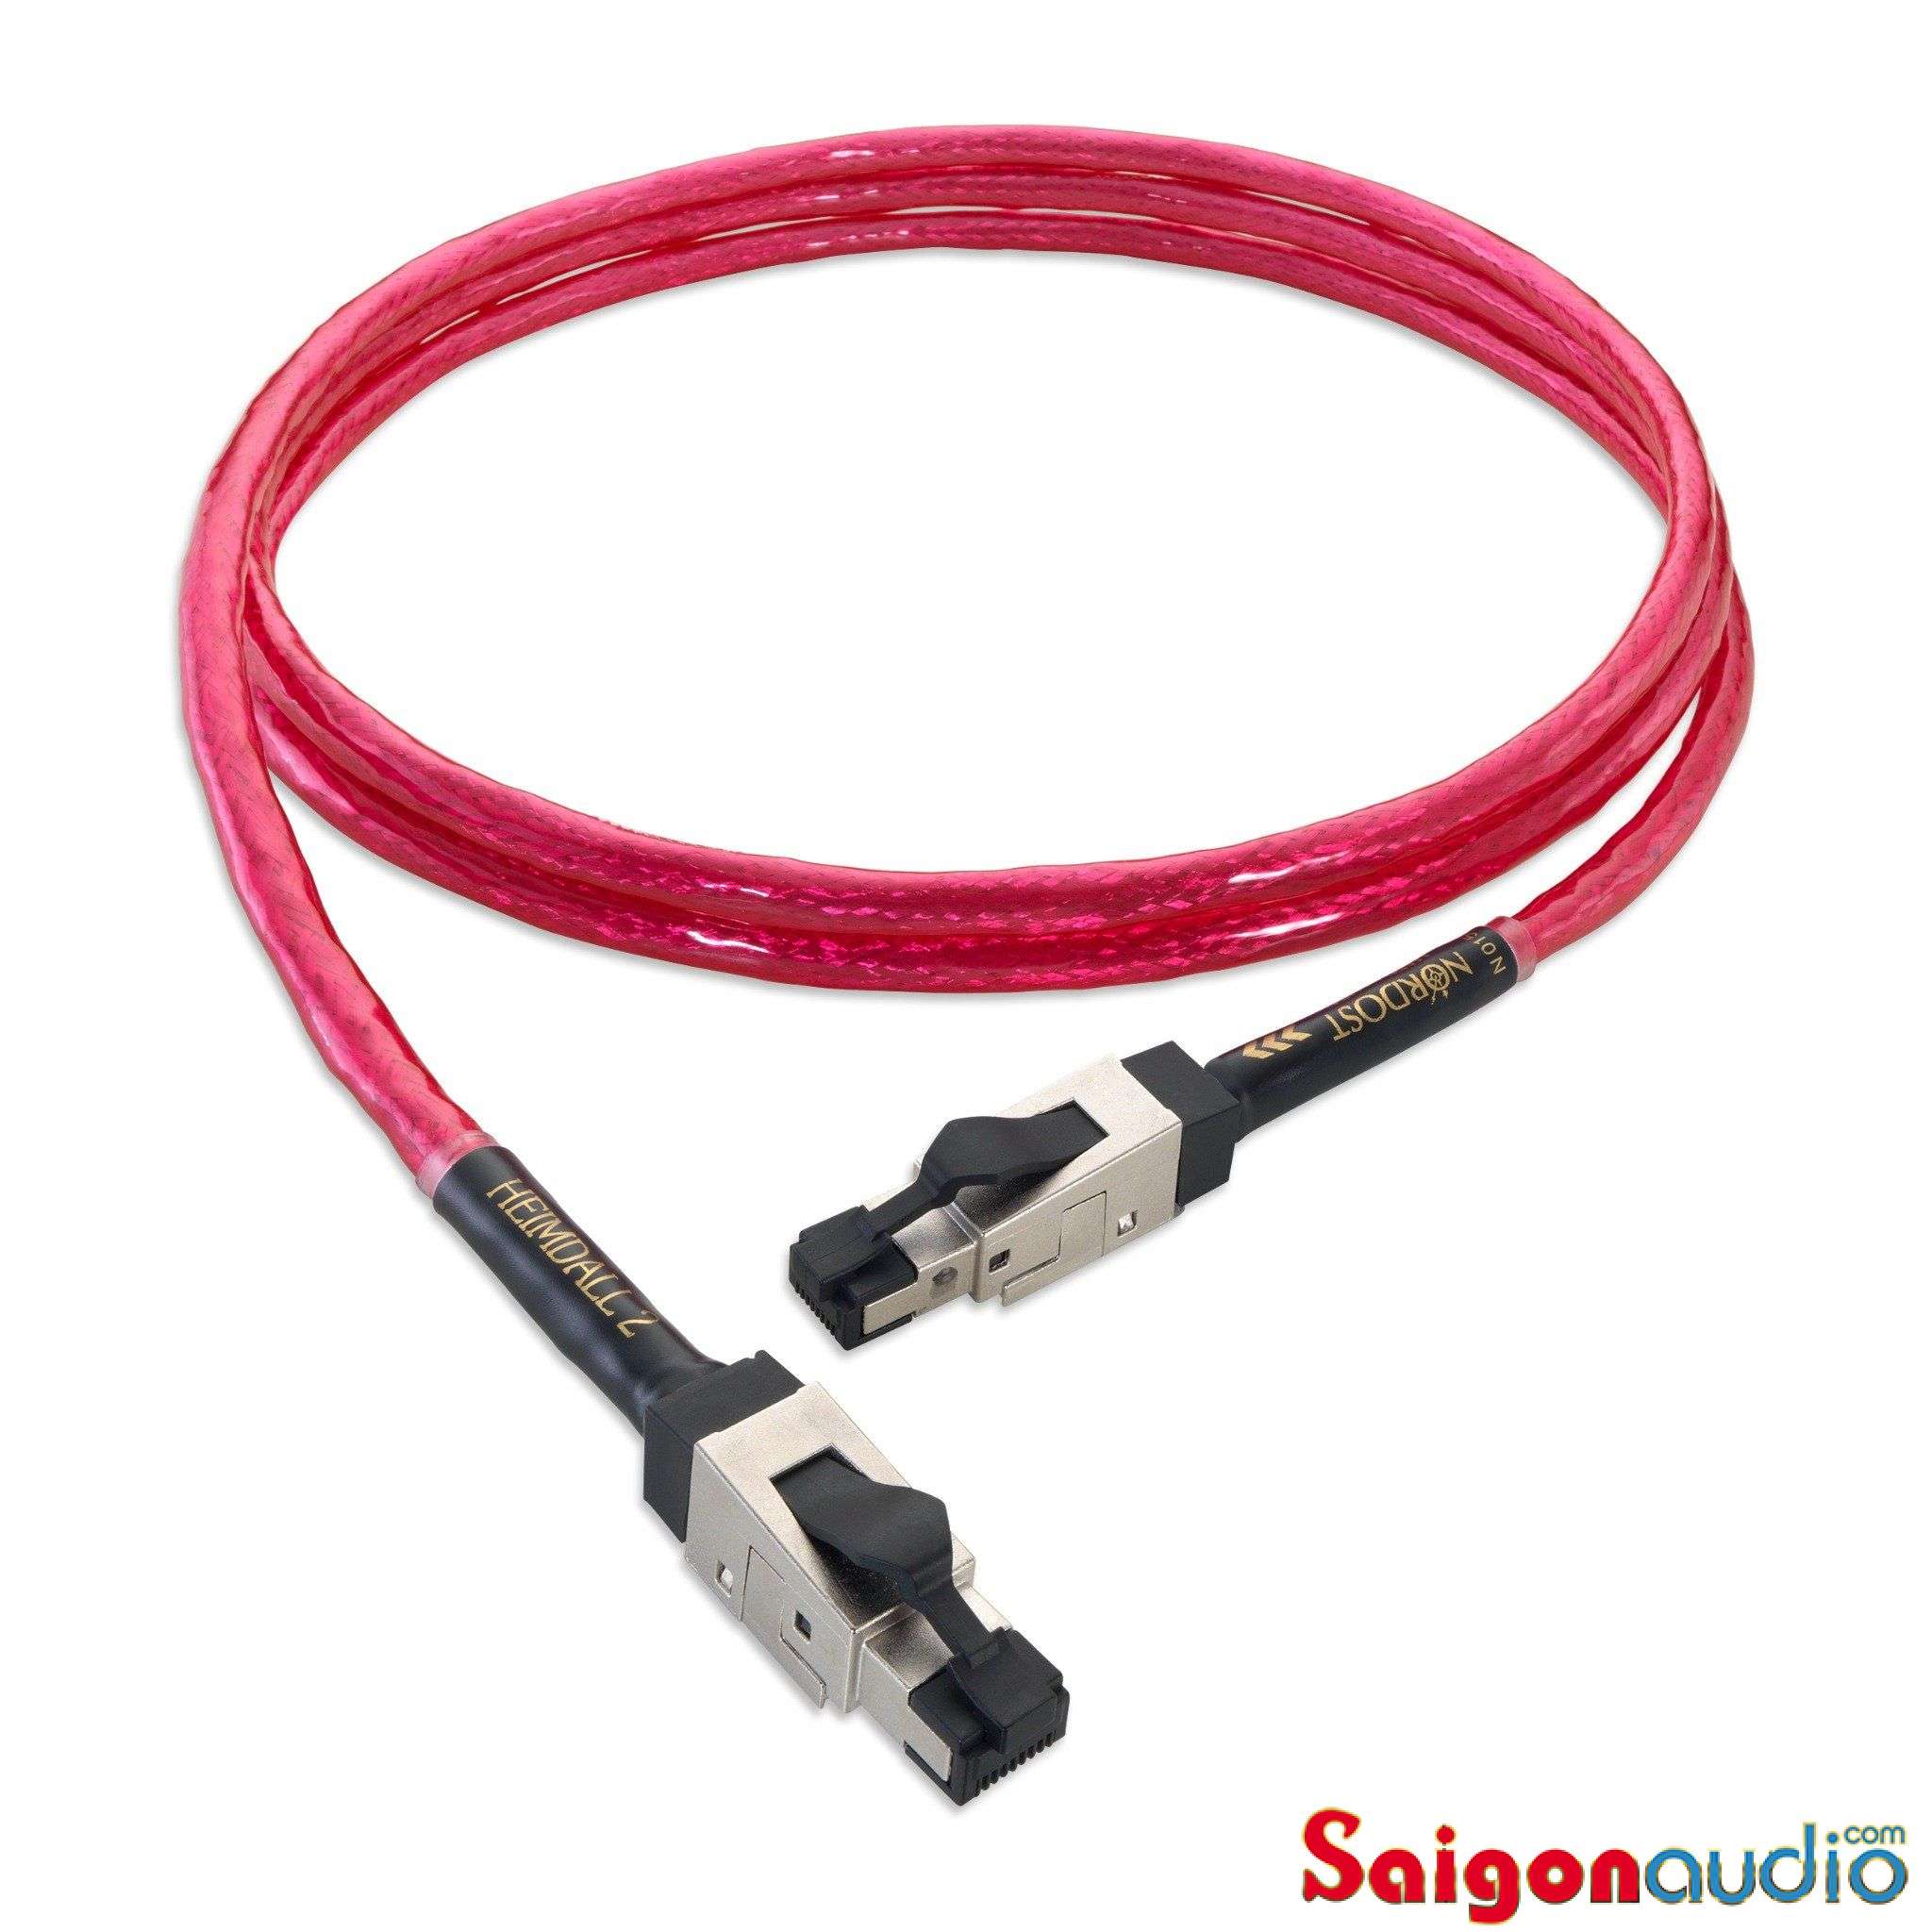 Dây Ethernet Nordost Norse HEIMDALL 2 | 1m, 2m